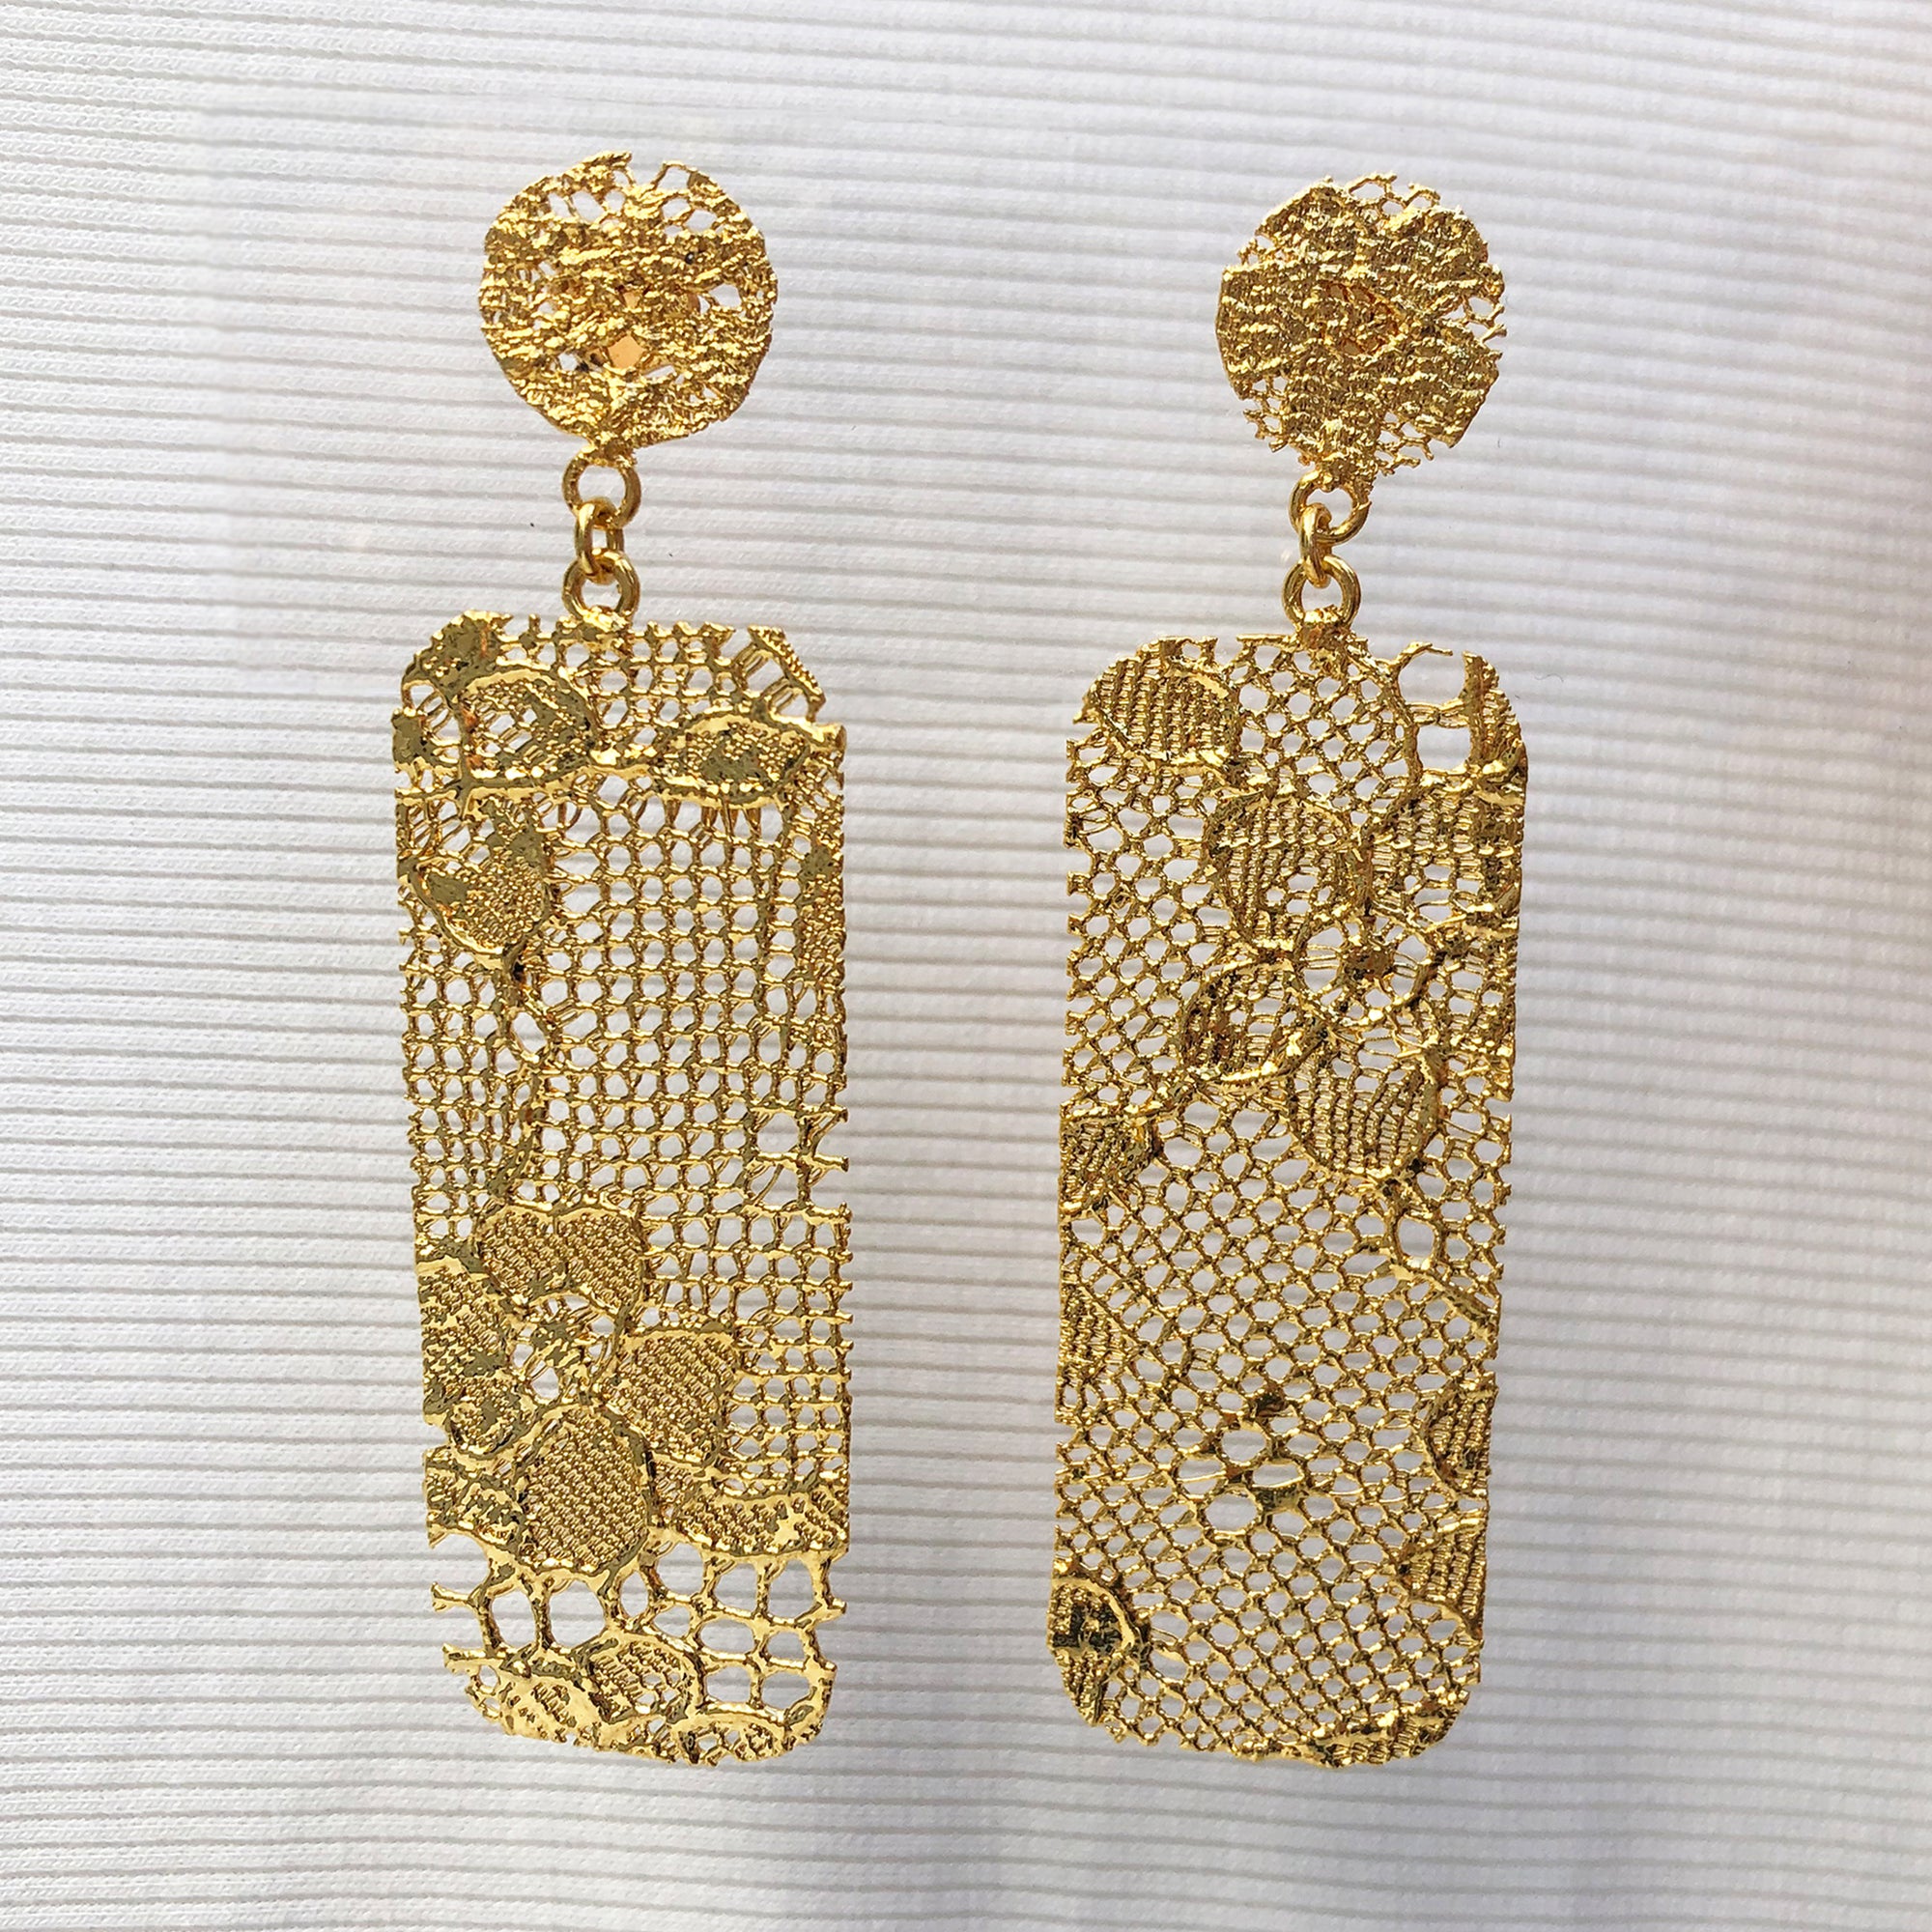 Sophisticated large rectangular lace earrings in 24k gold.